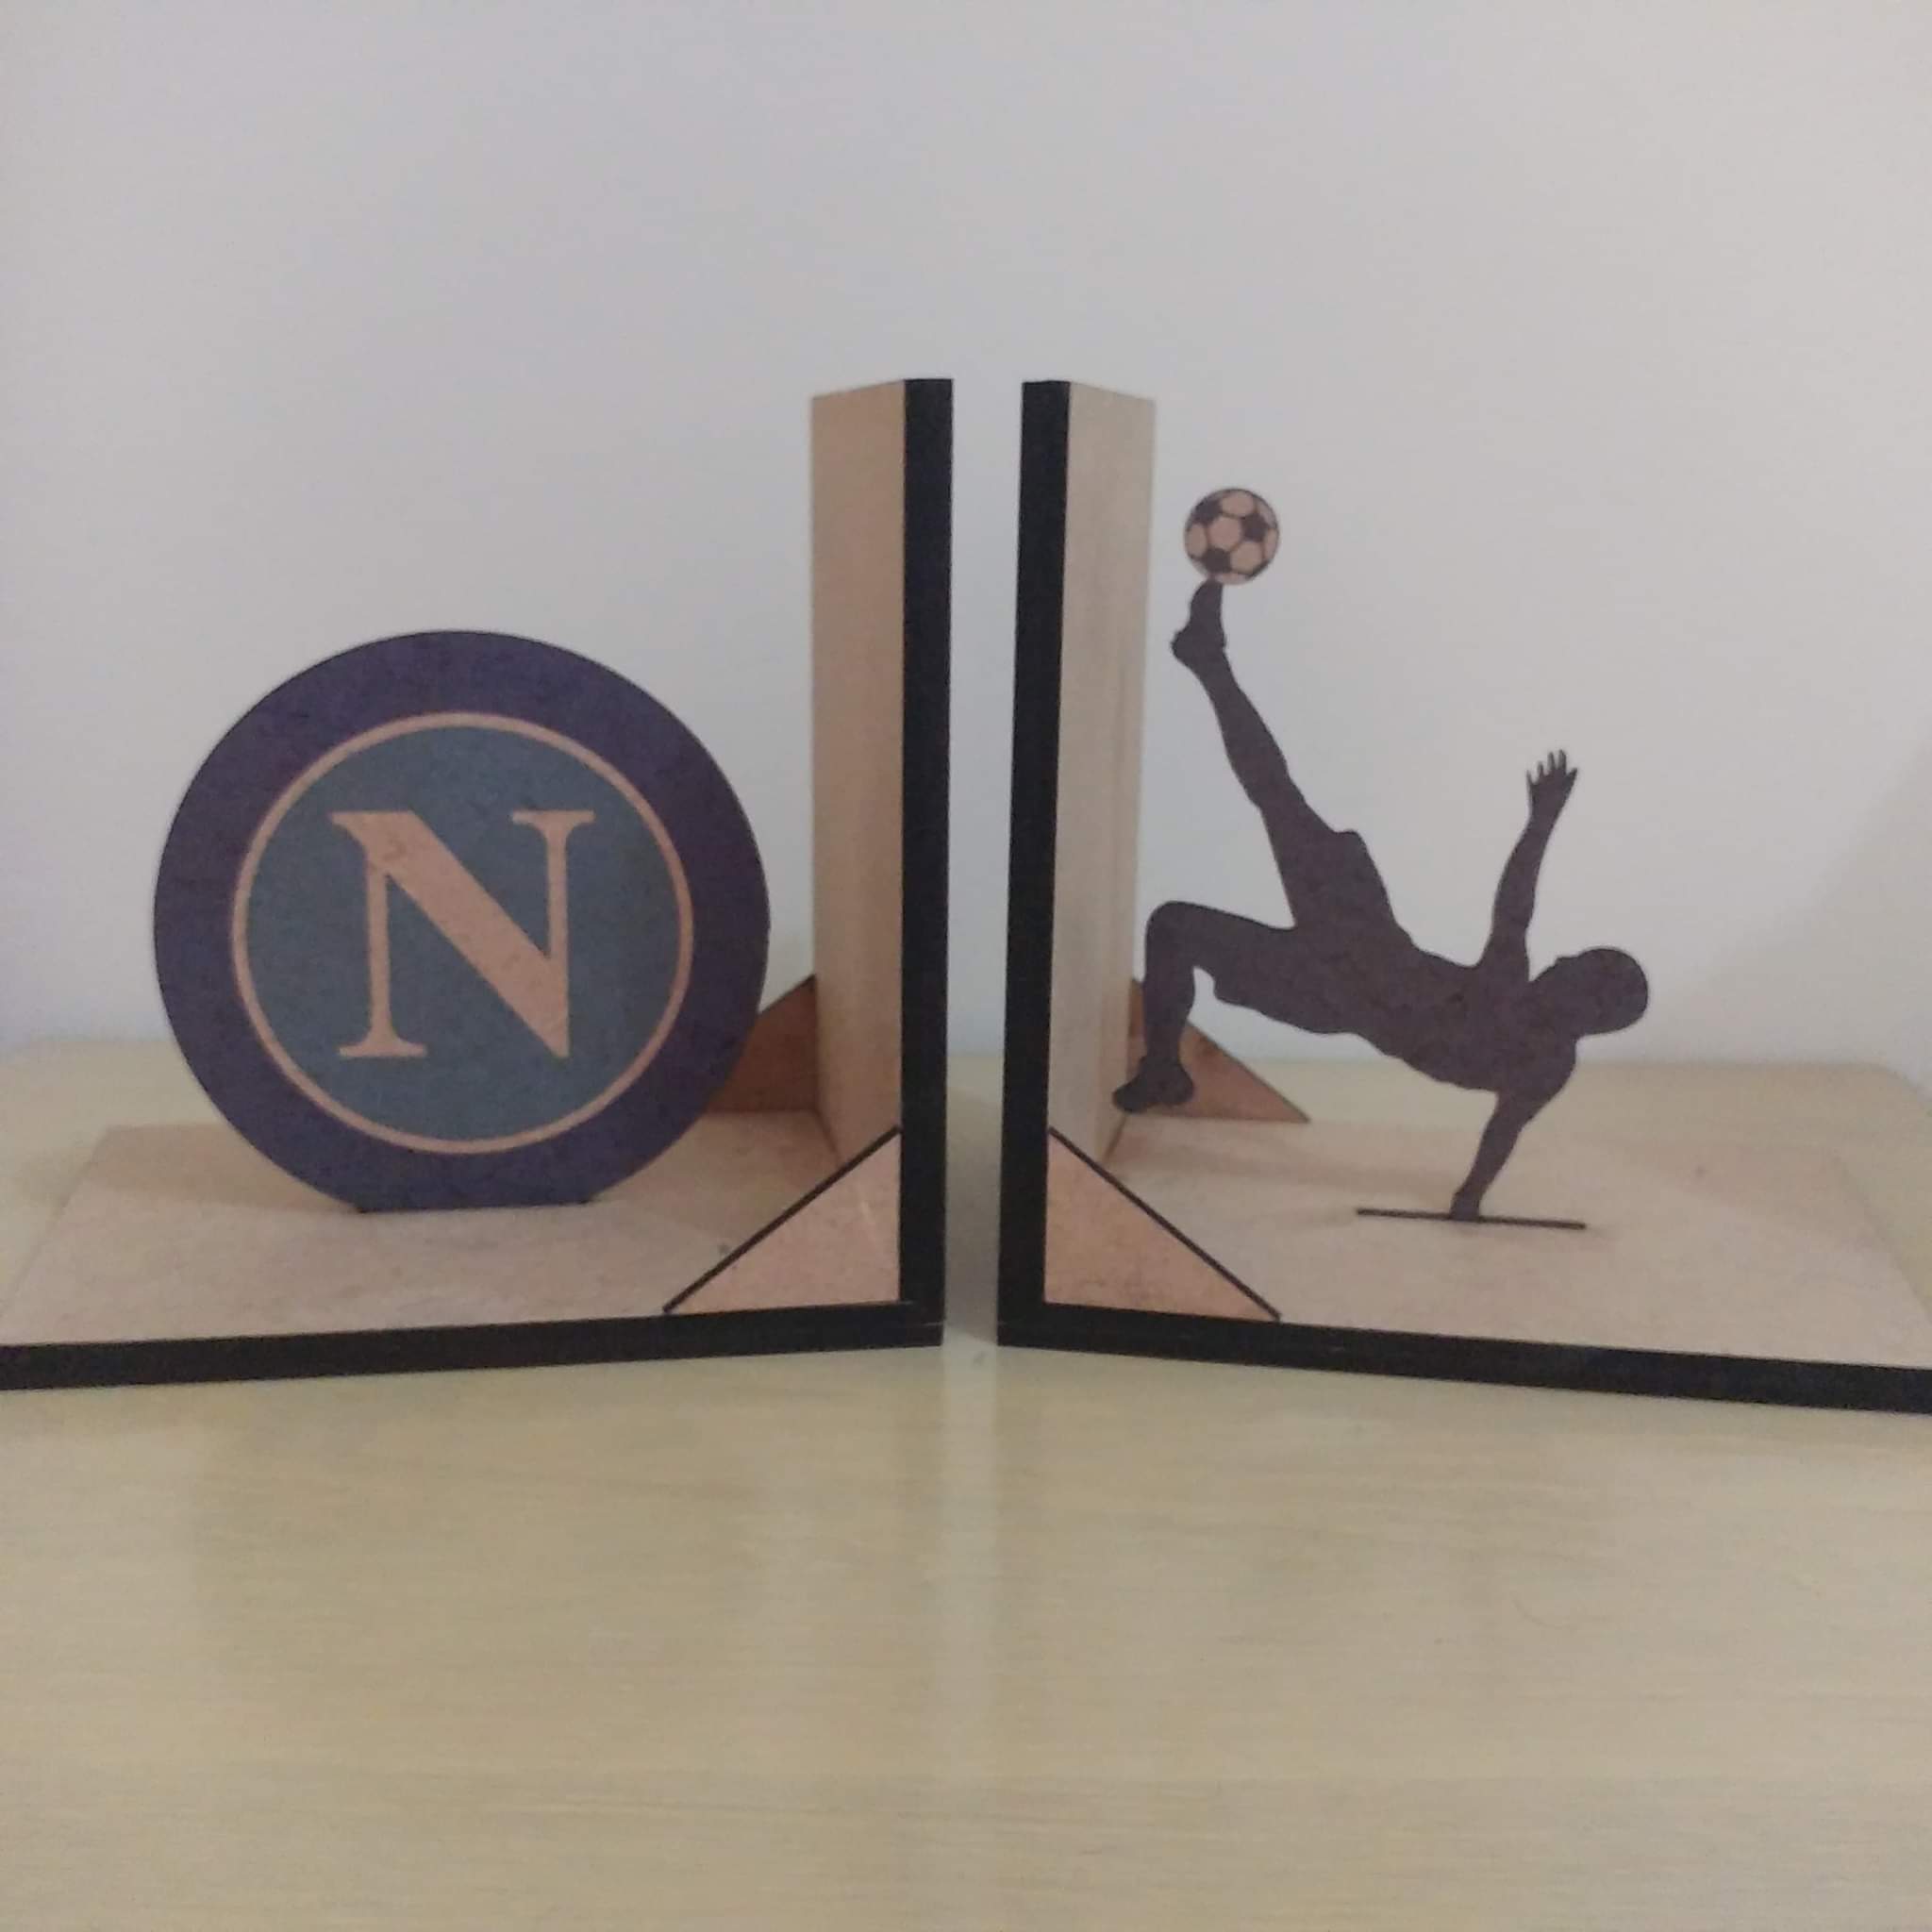 Bookend Mdf Wood